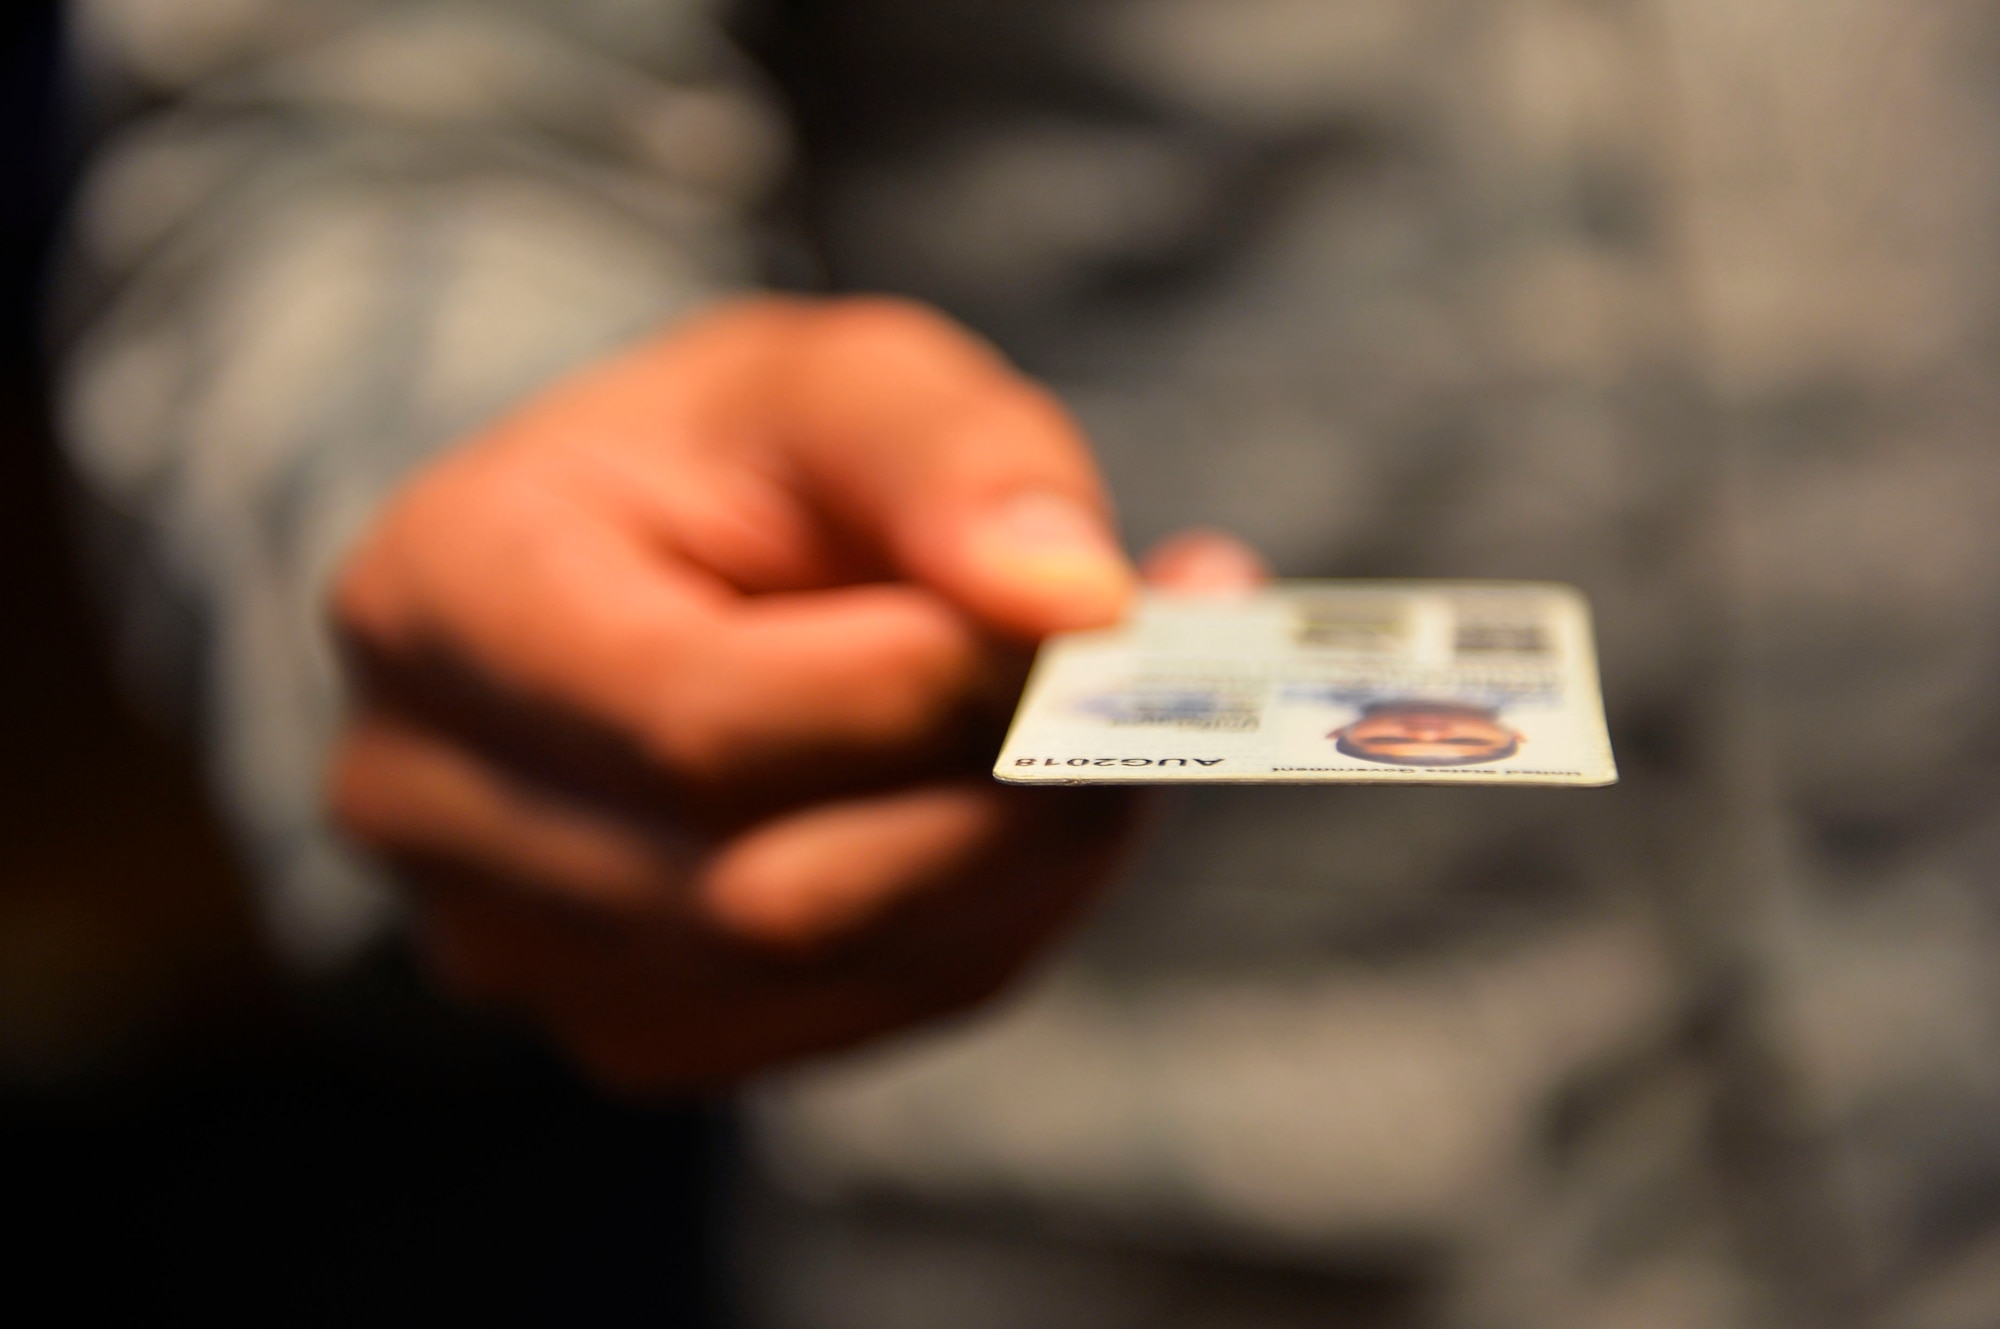 Staff Sgt. Stephen Ellis, 86th Airlift Wing public affairs broadcast journalist craftsman, holds a common access card on Ramstein Air Base, Germany, Jan. 19, 2018. The 786th Force Support Squadron instituted changes in how appointments are made for requesting new I.D. cards and renewing dependent I.D.’s. (U.S. Air Force photo by Senior Airman Joshua Magbanua)